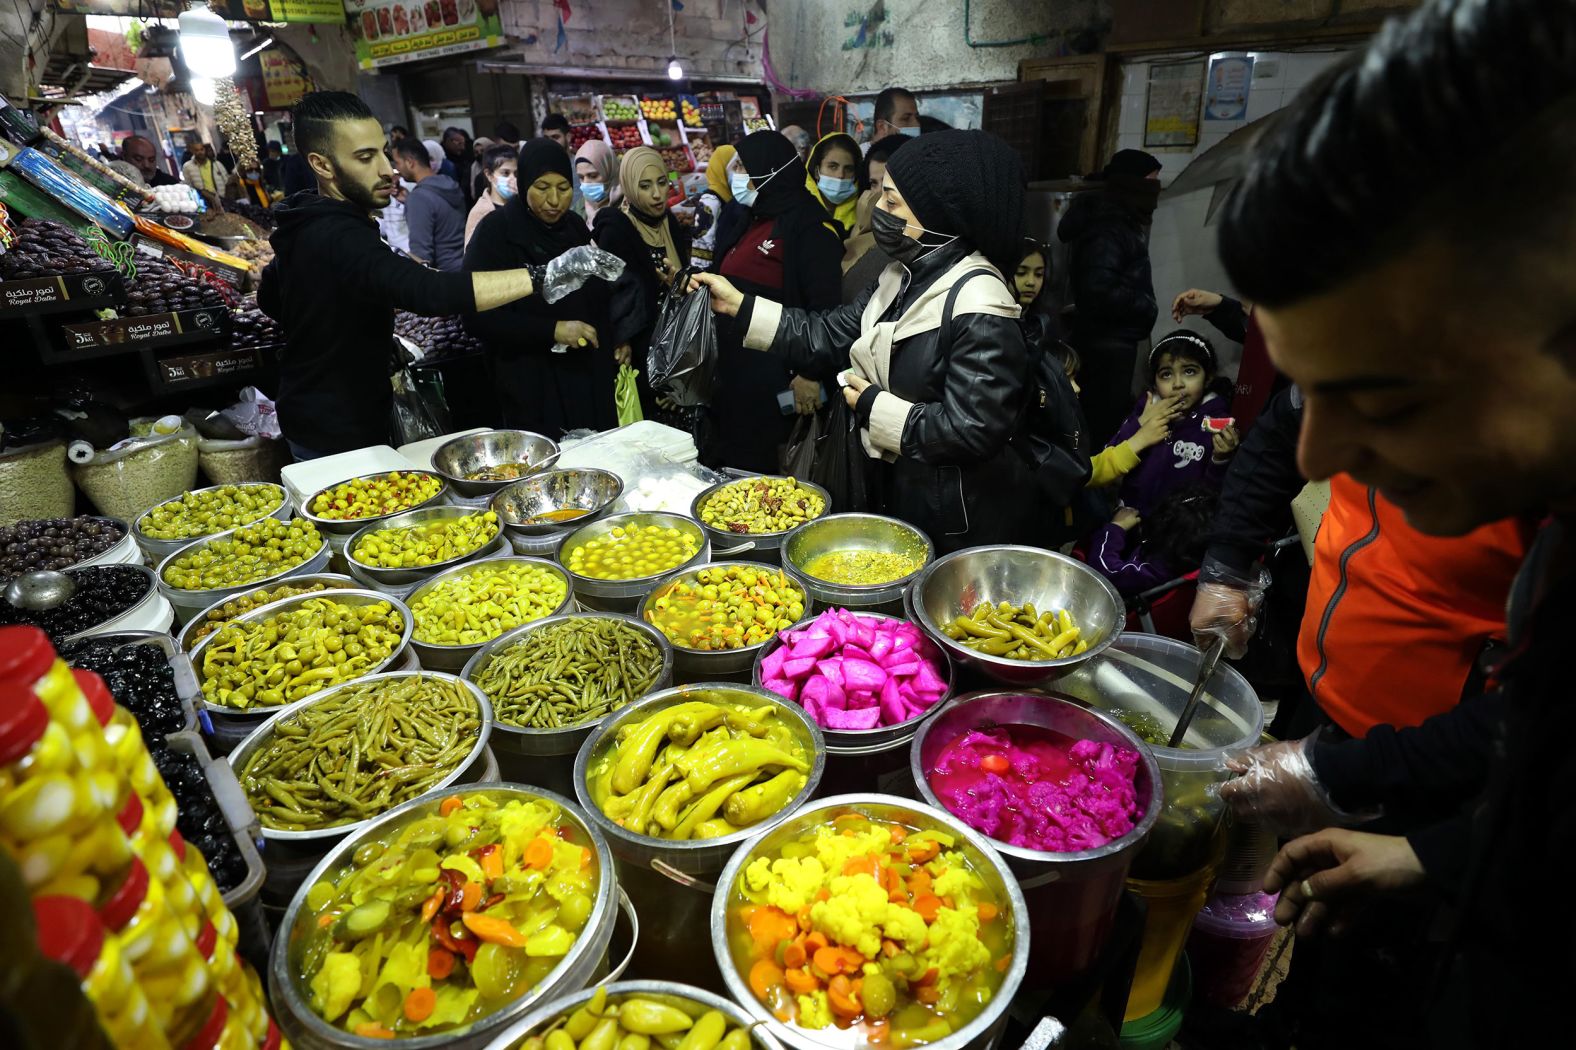 Ahead of Ramadan, a woman buys pickles at a market in Nablus, West Bank.